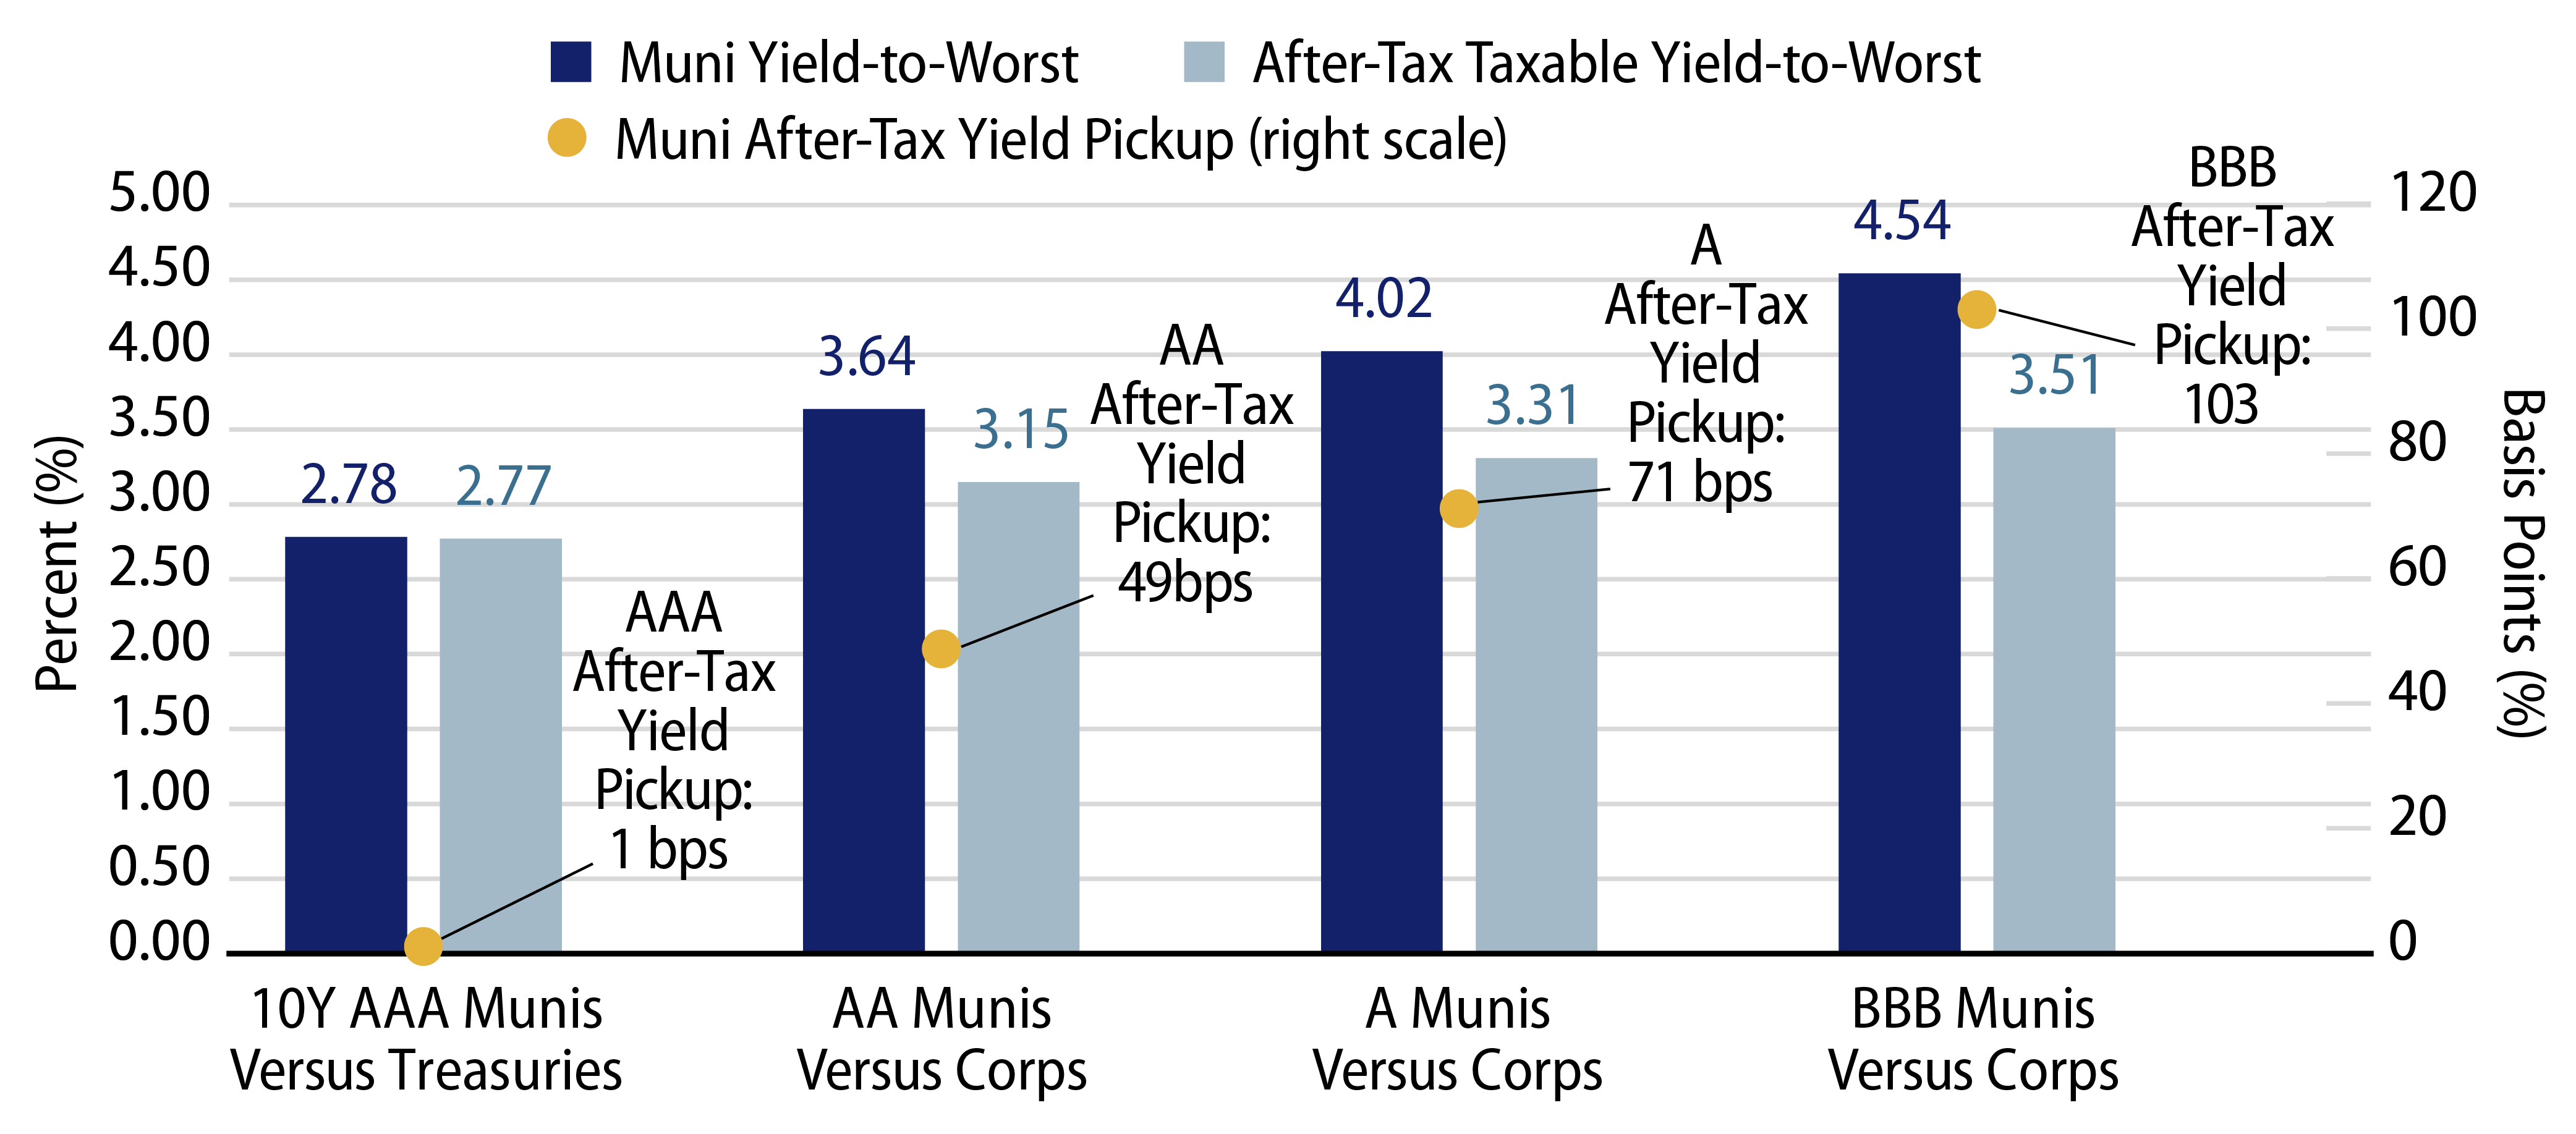 After-Tax Yield Pickup by Quality Cohort